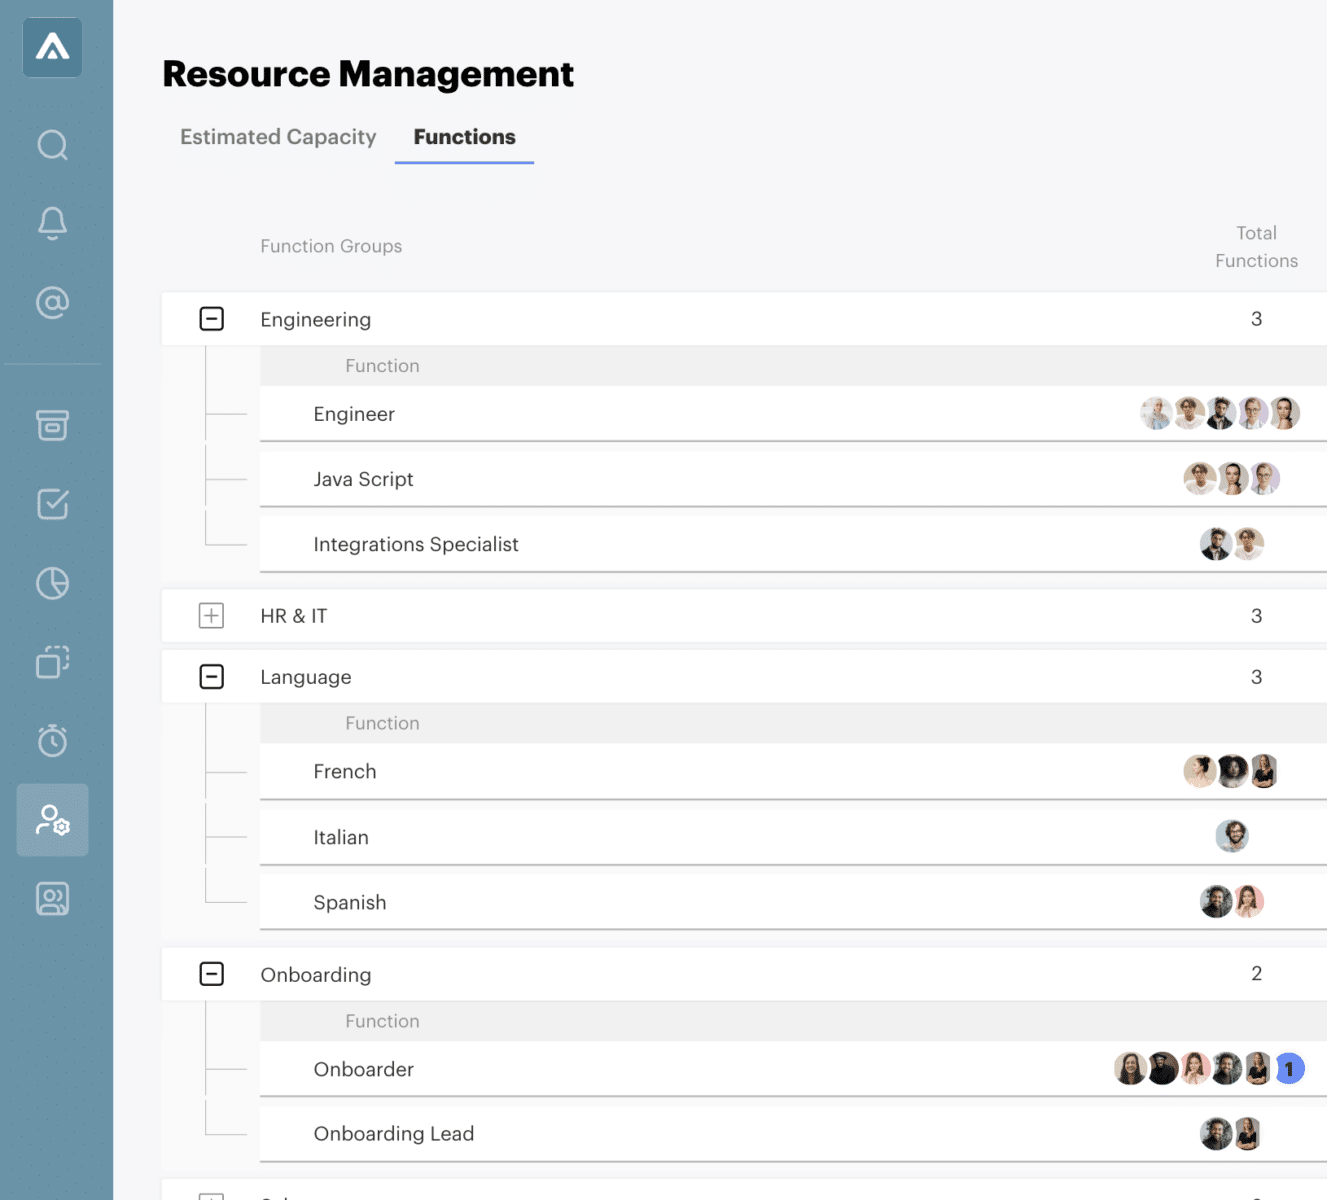 resource management functions view in GUIDEcx onboarding platform. Shows different functional groups and functions in each group.